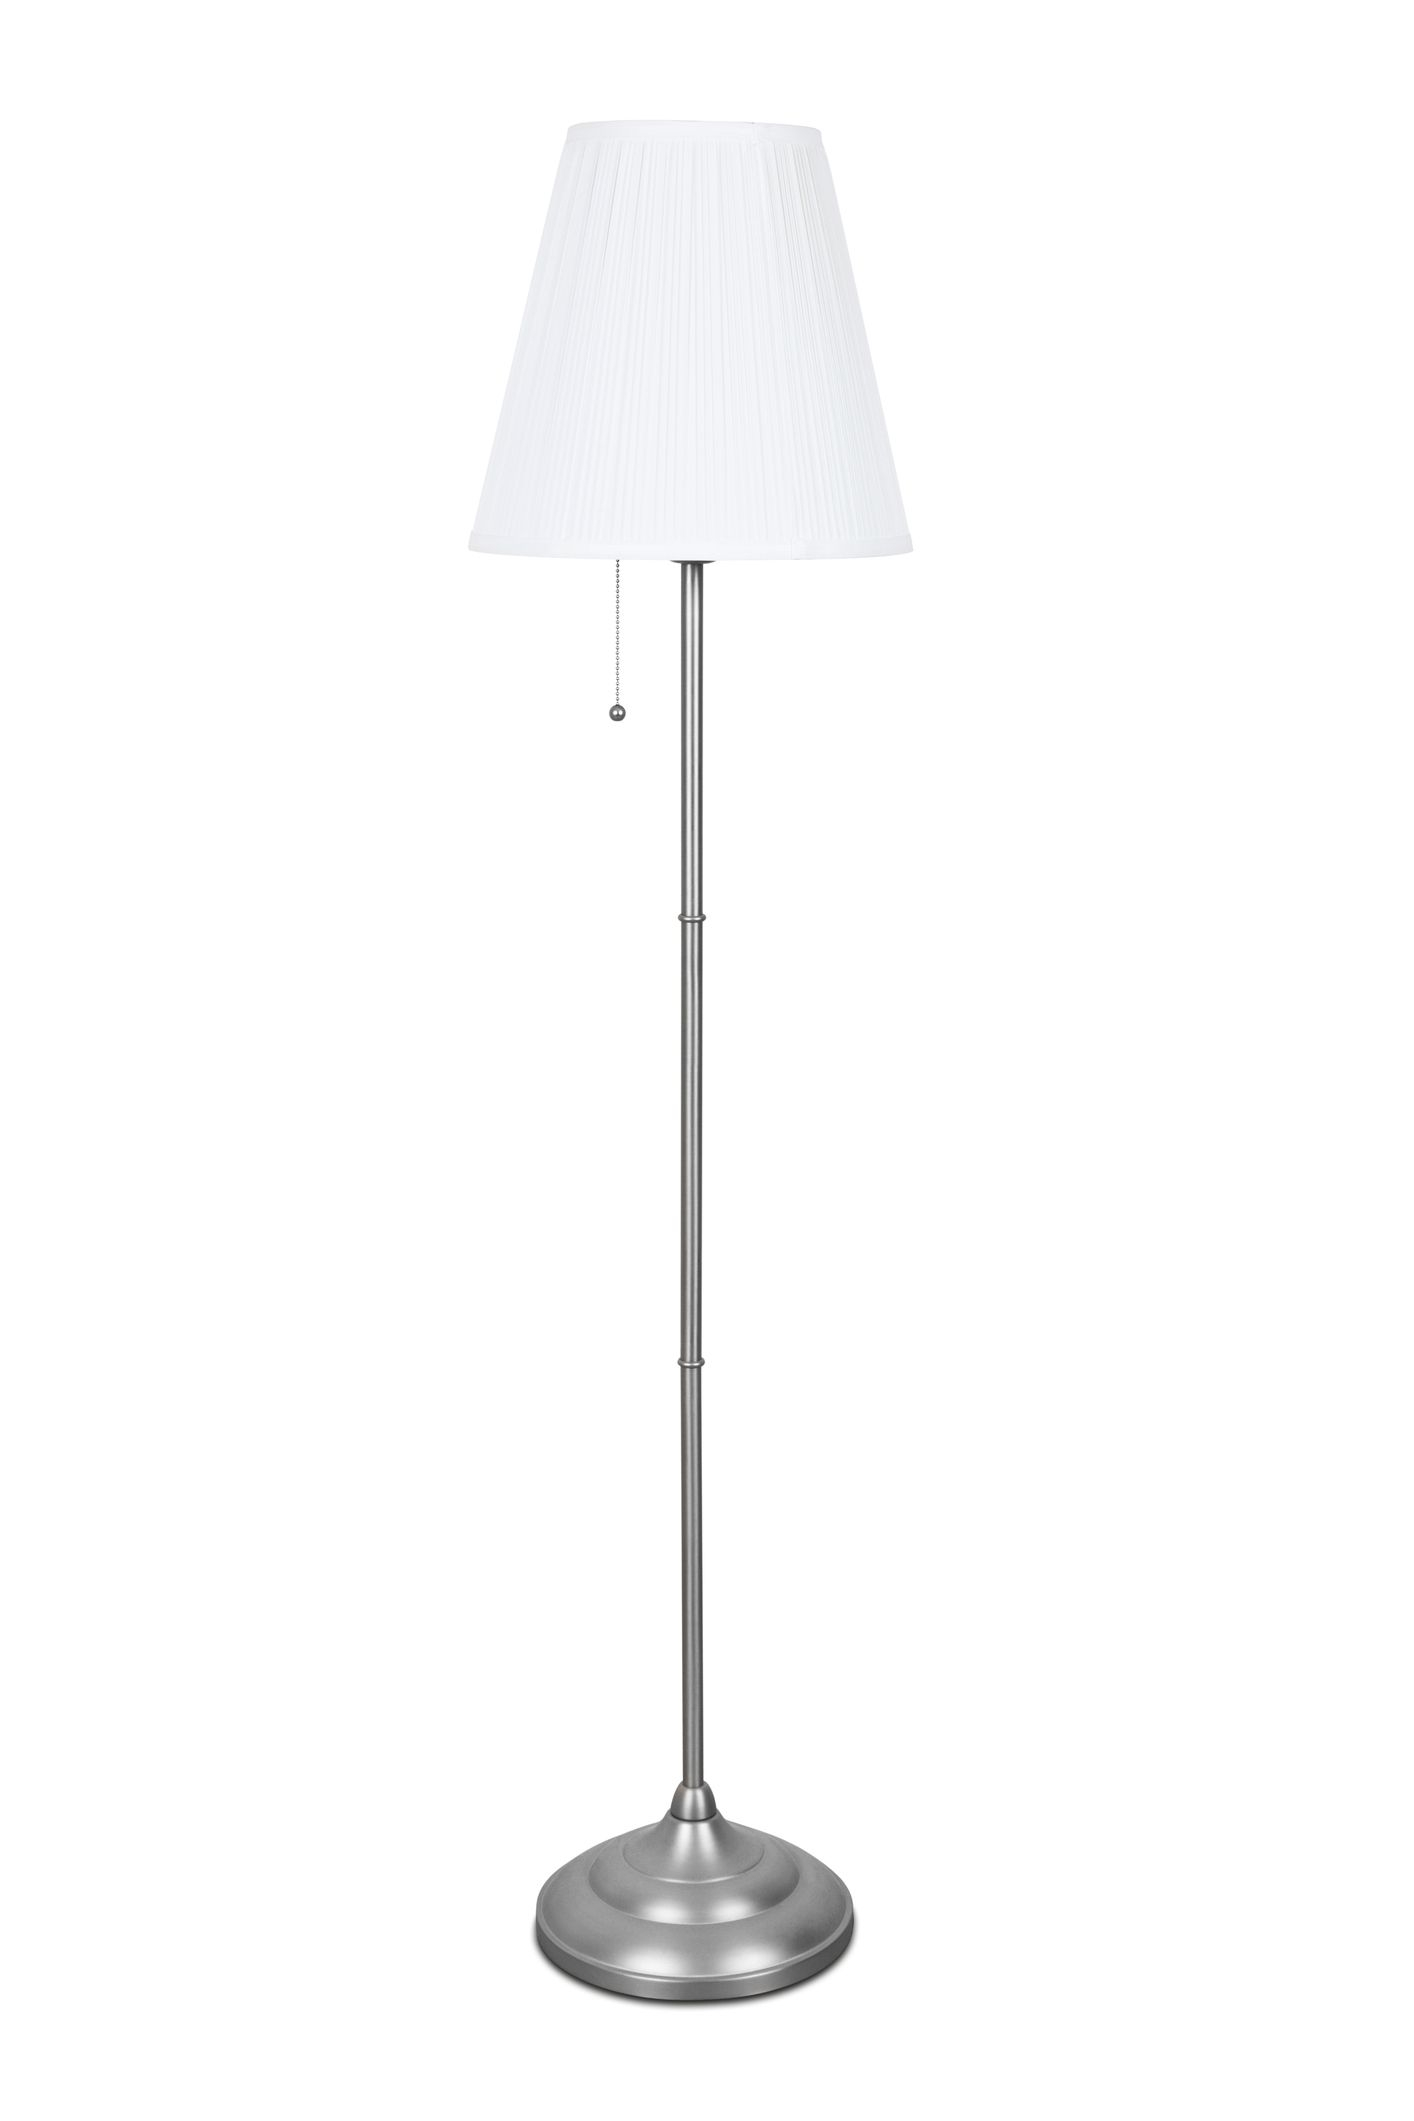 Different Types Of Floor Lamps for dimensions 1414 X 2121